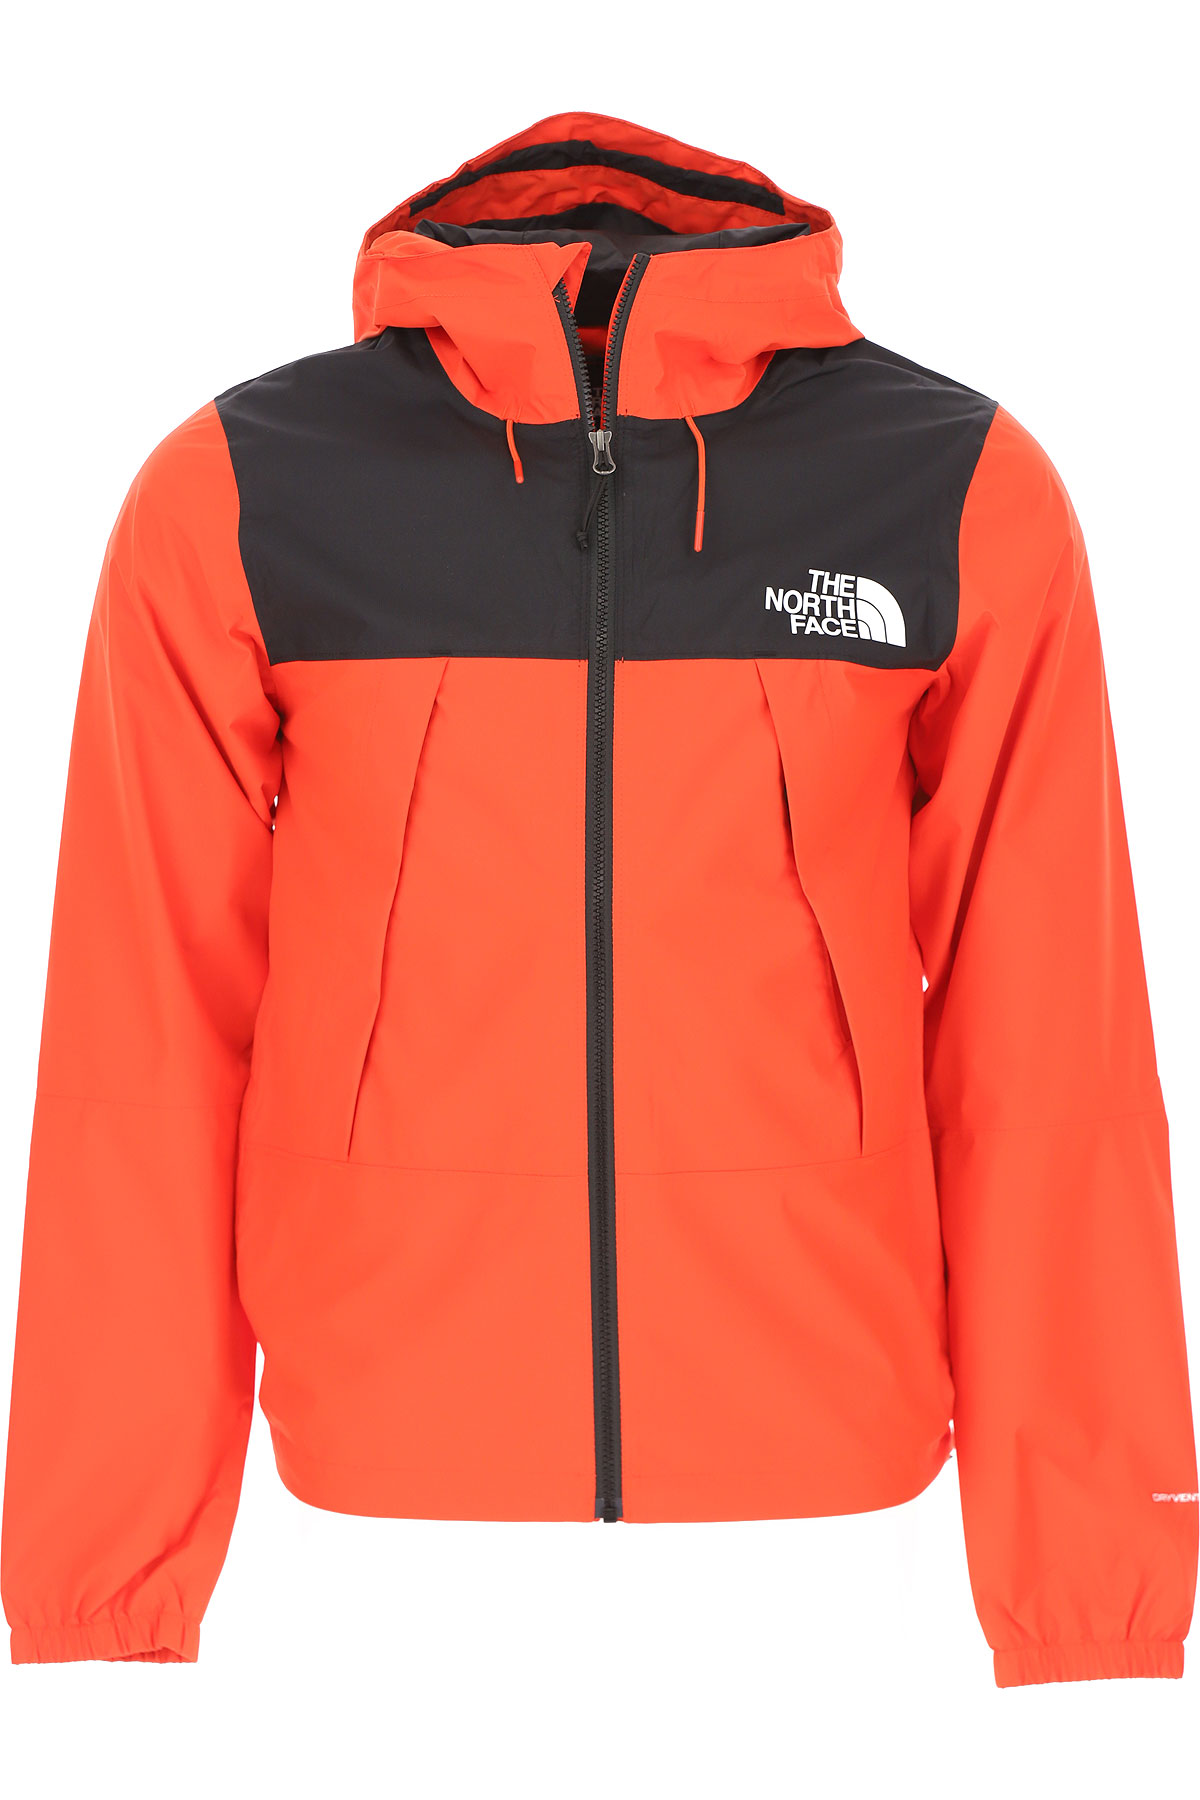 Mens Clothing The North Face, Style code nf0a2s5115q1